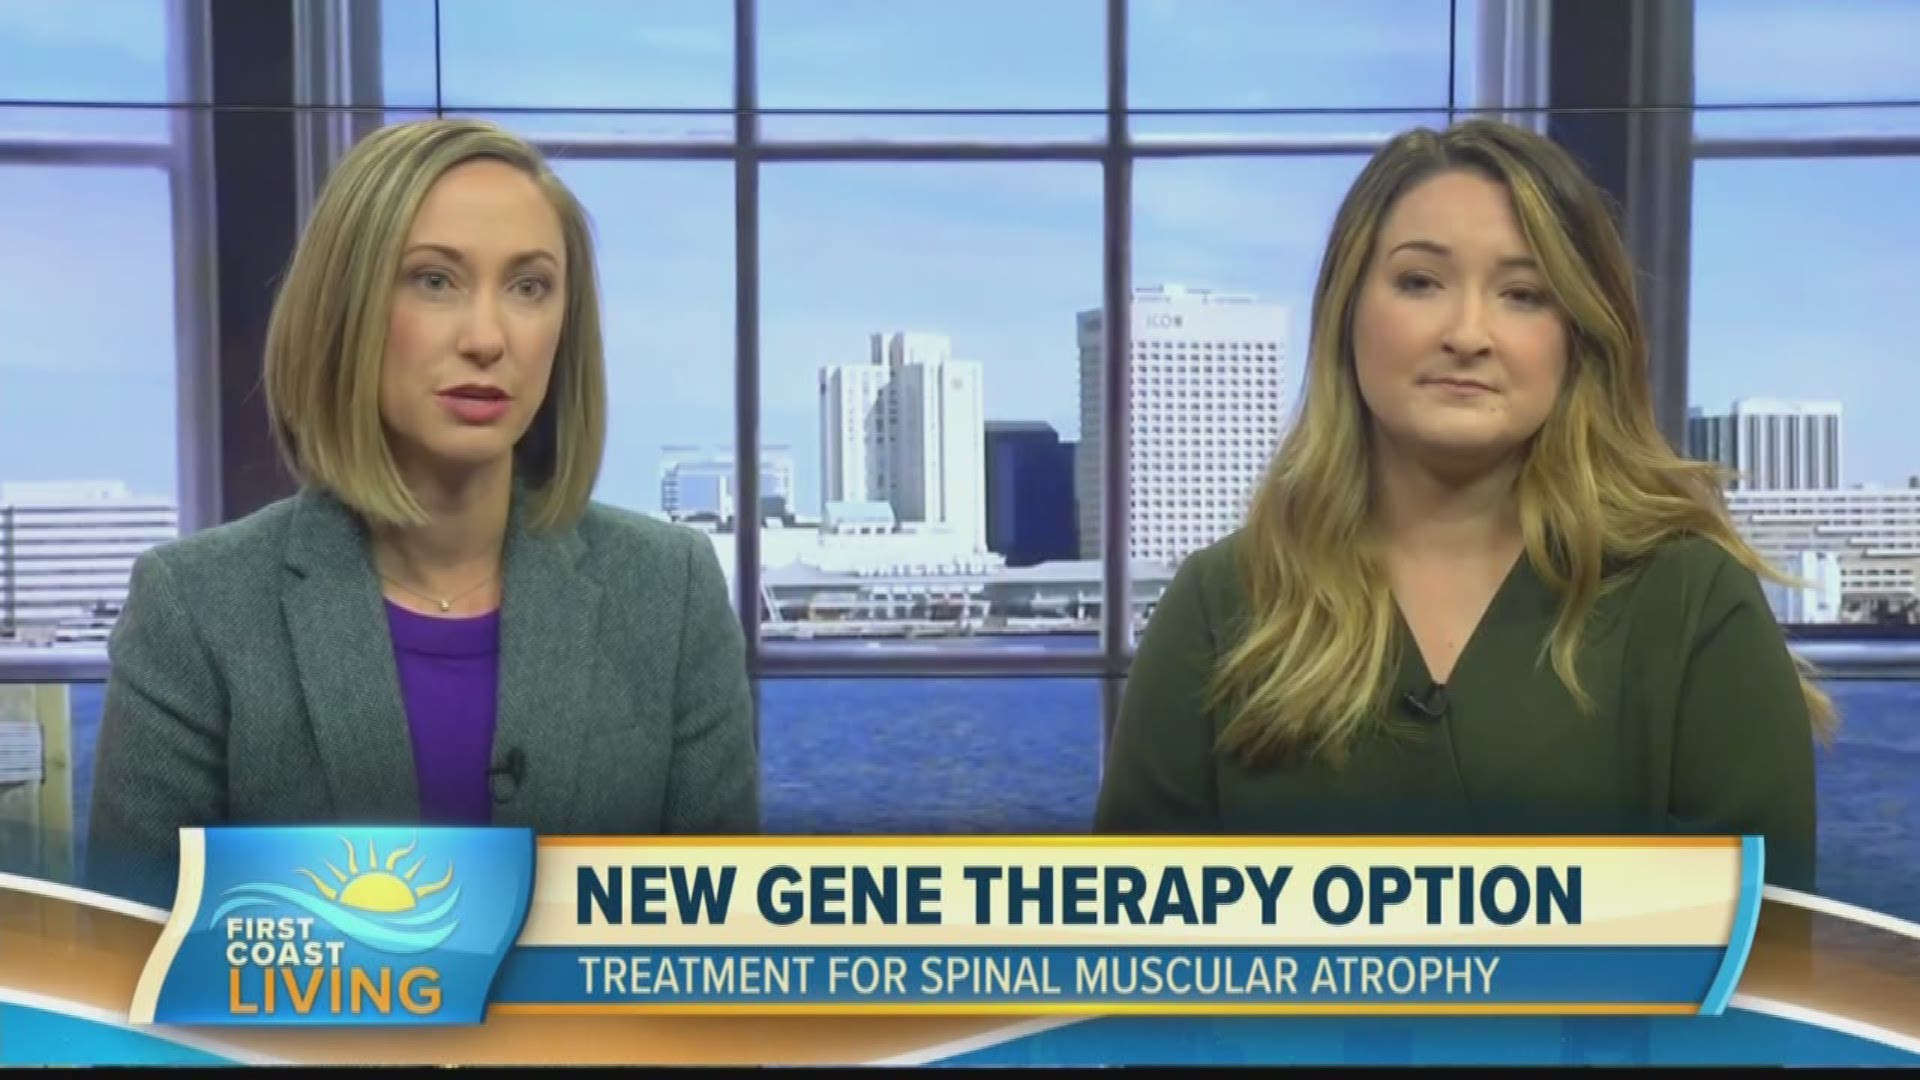 November is National Caregivers Month, hear one family’s journey from diagnosis of spinal muscular atrophy to treatment with a new gene therapy.